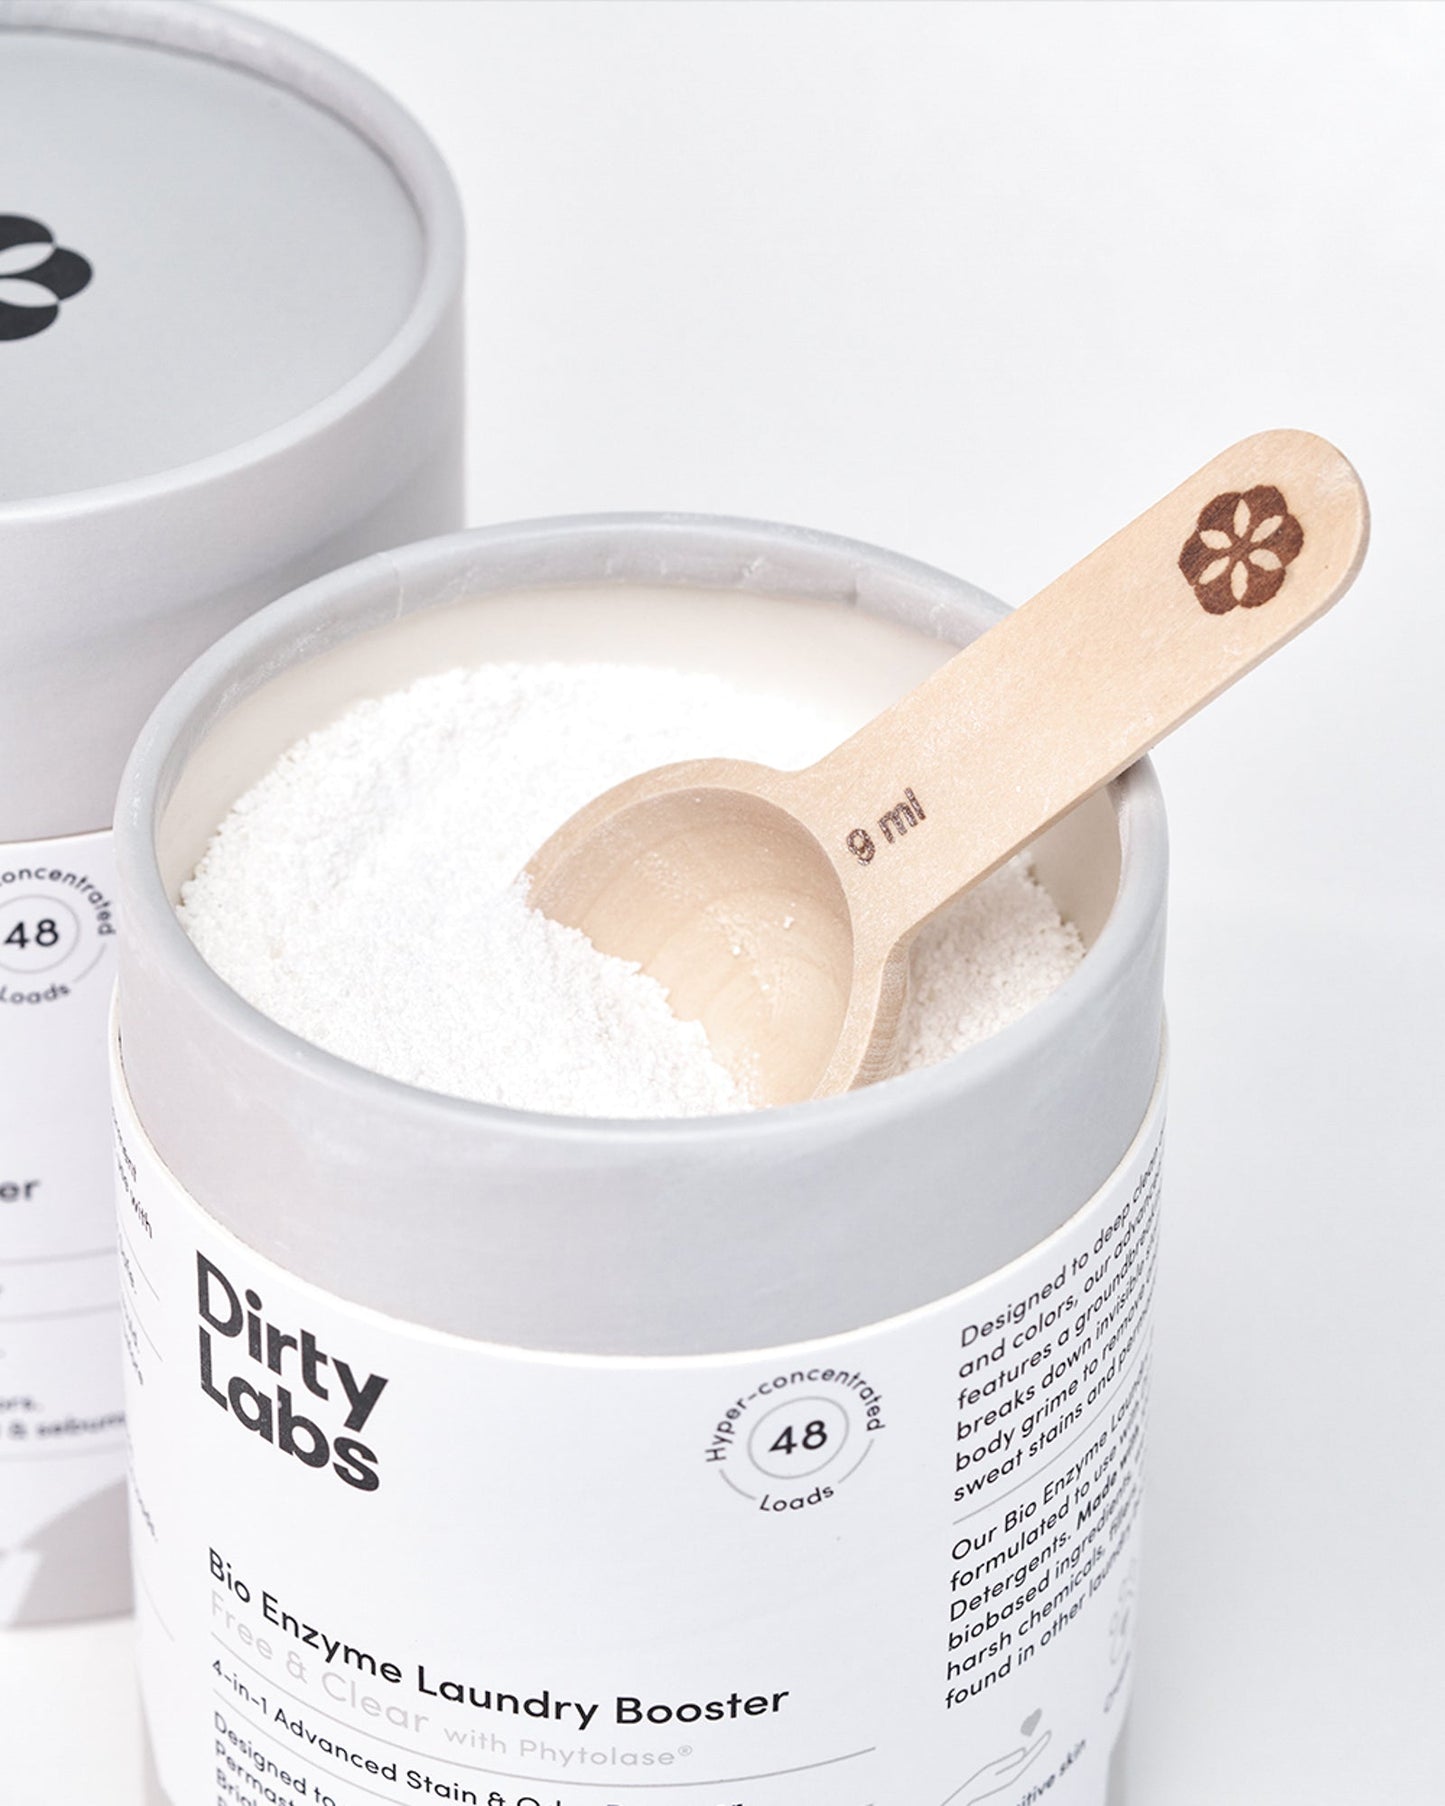 
                  
                    Bio Enzyme Laundry Booster by Dirty Labs
                  
                